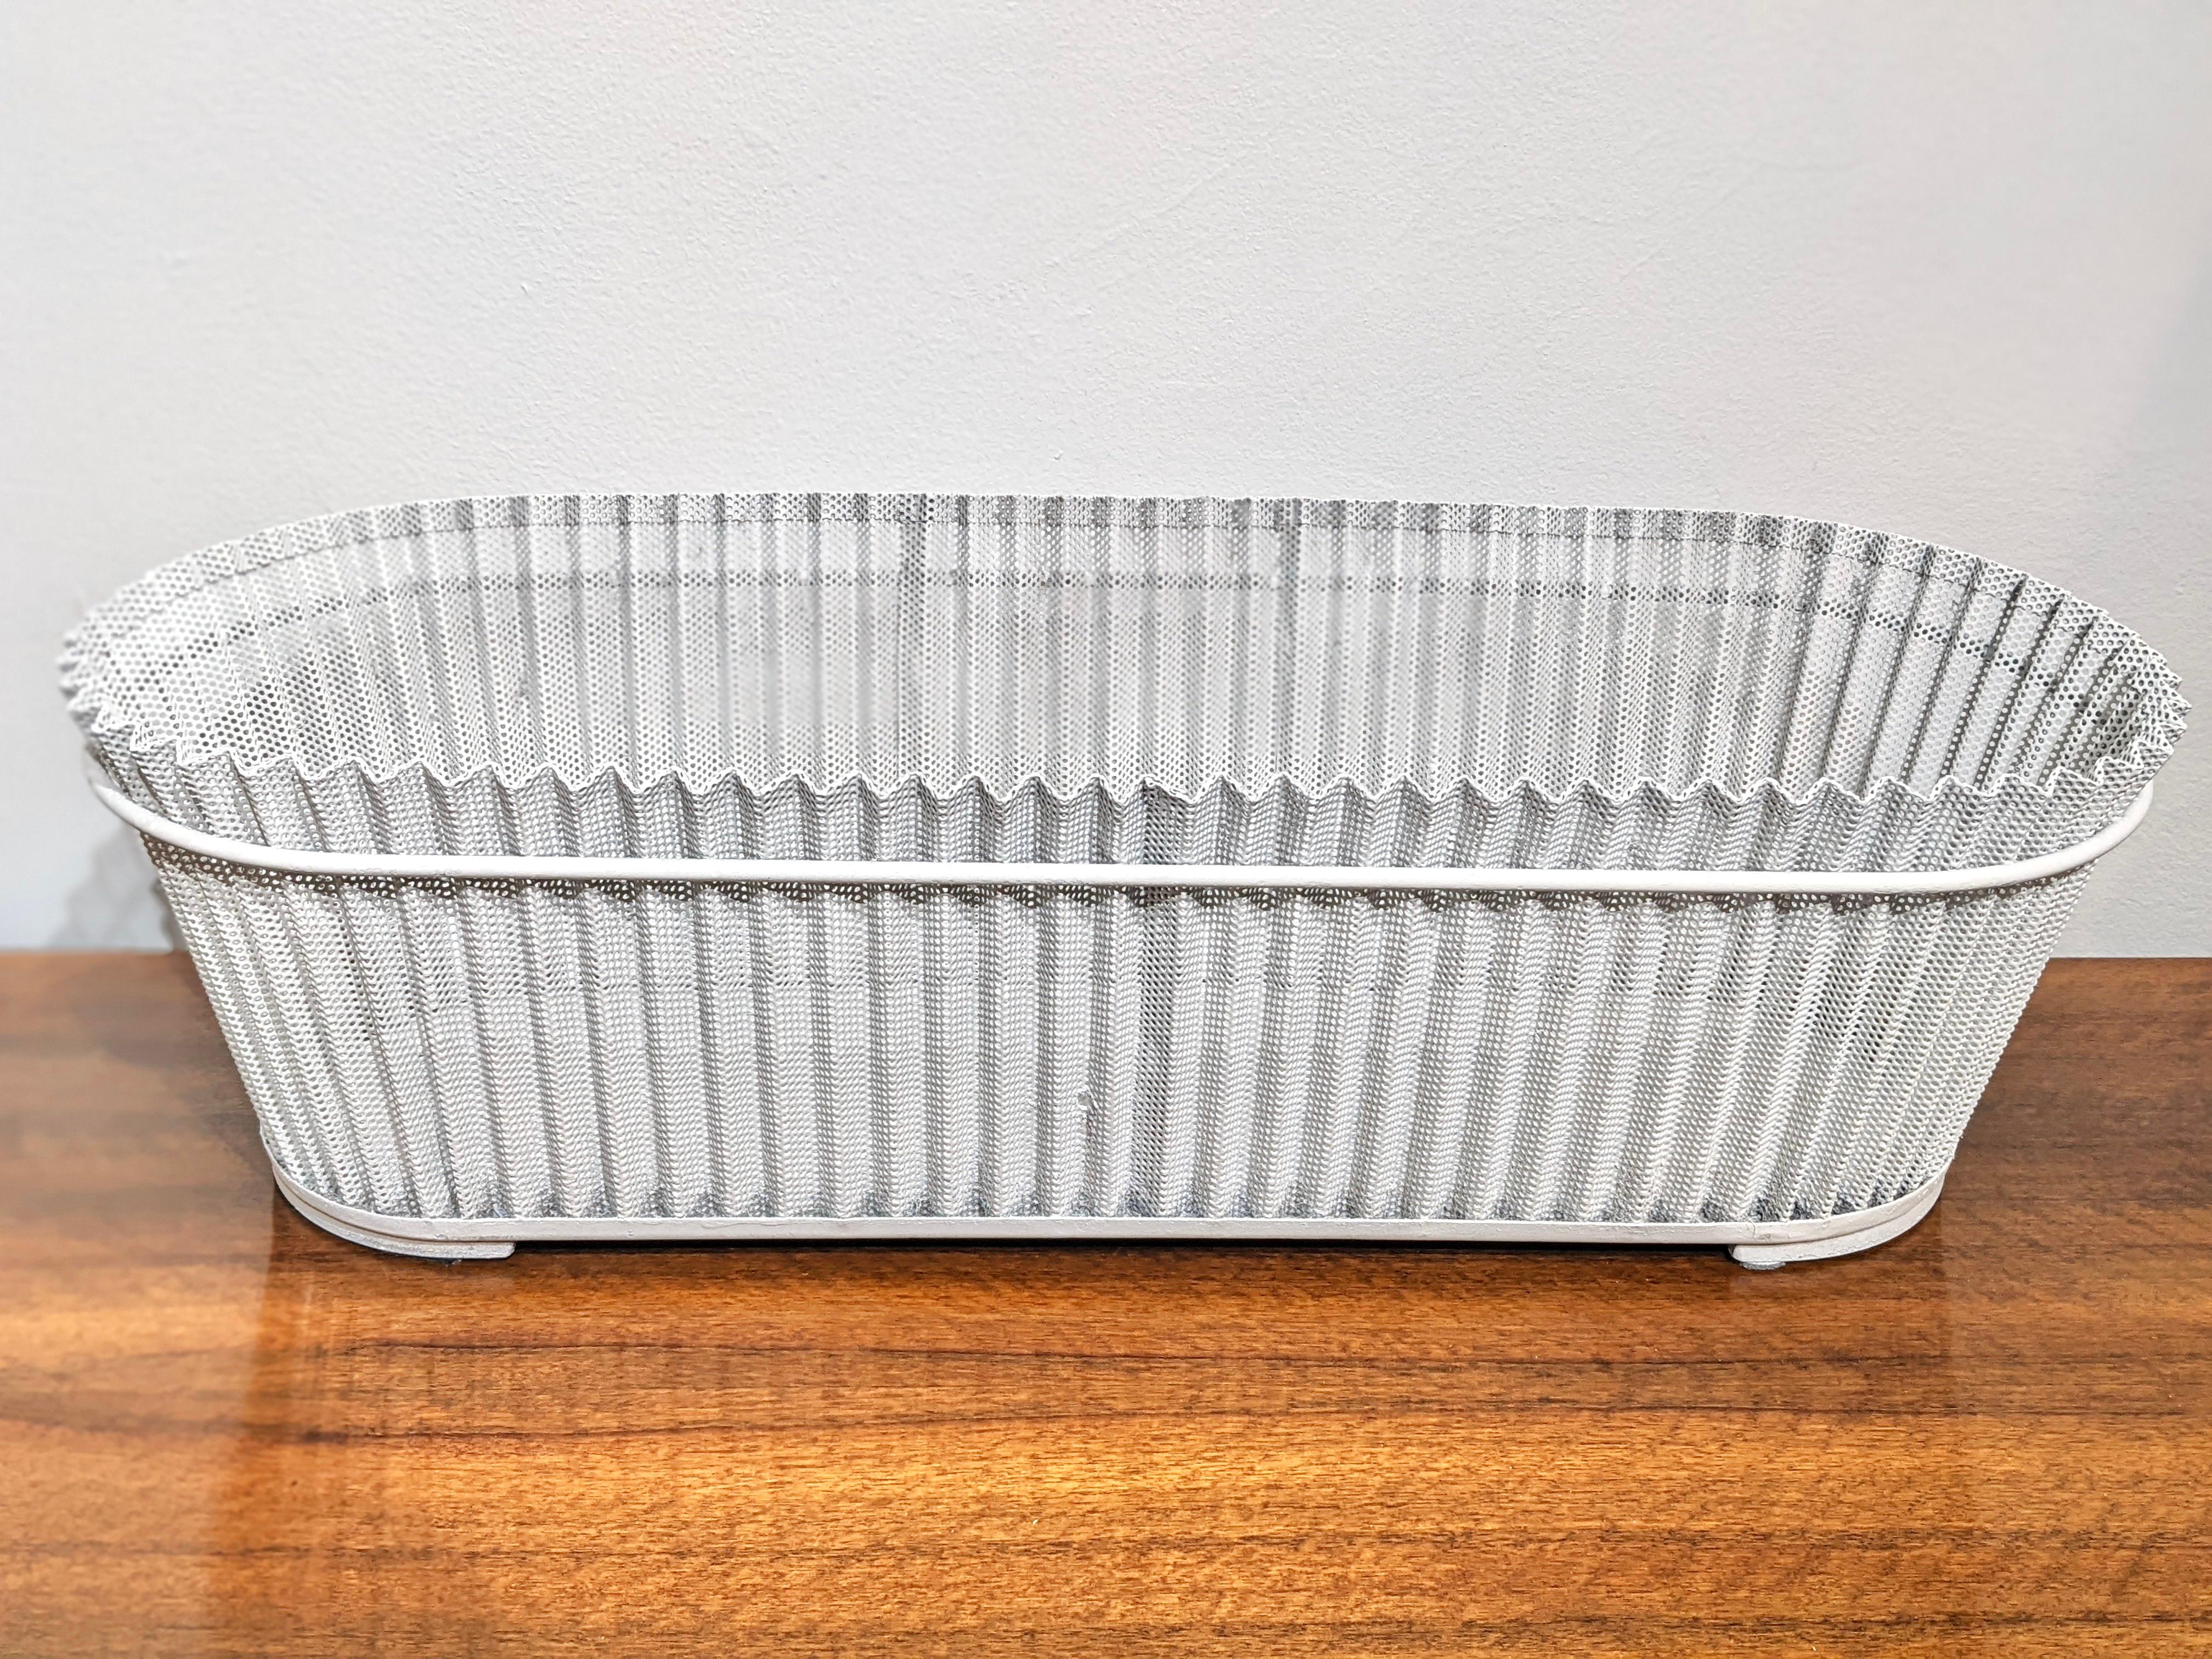 Mid-20th Century Planter in White Perforated Sheet Metal by Mathieu Matégot For Sale